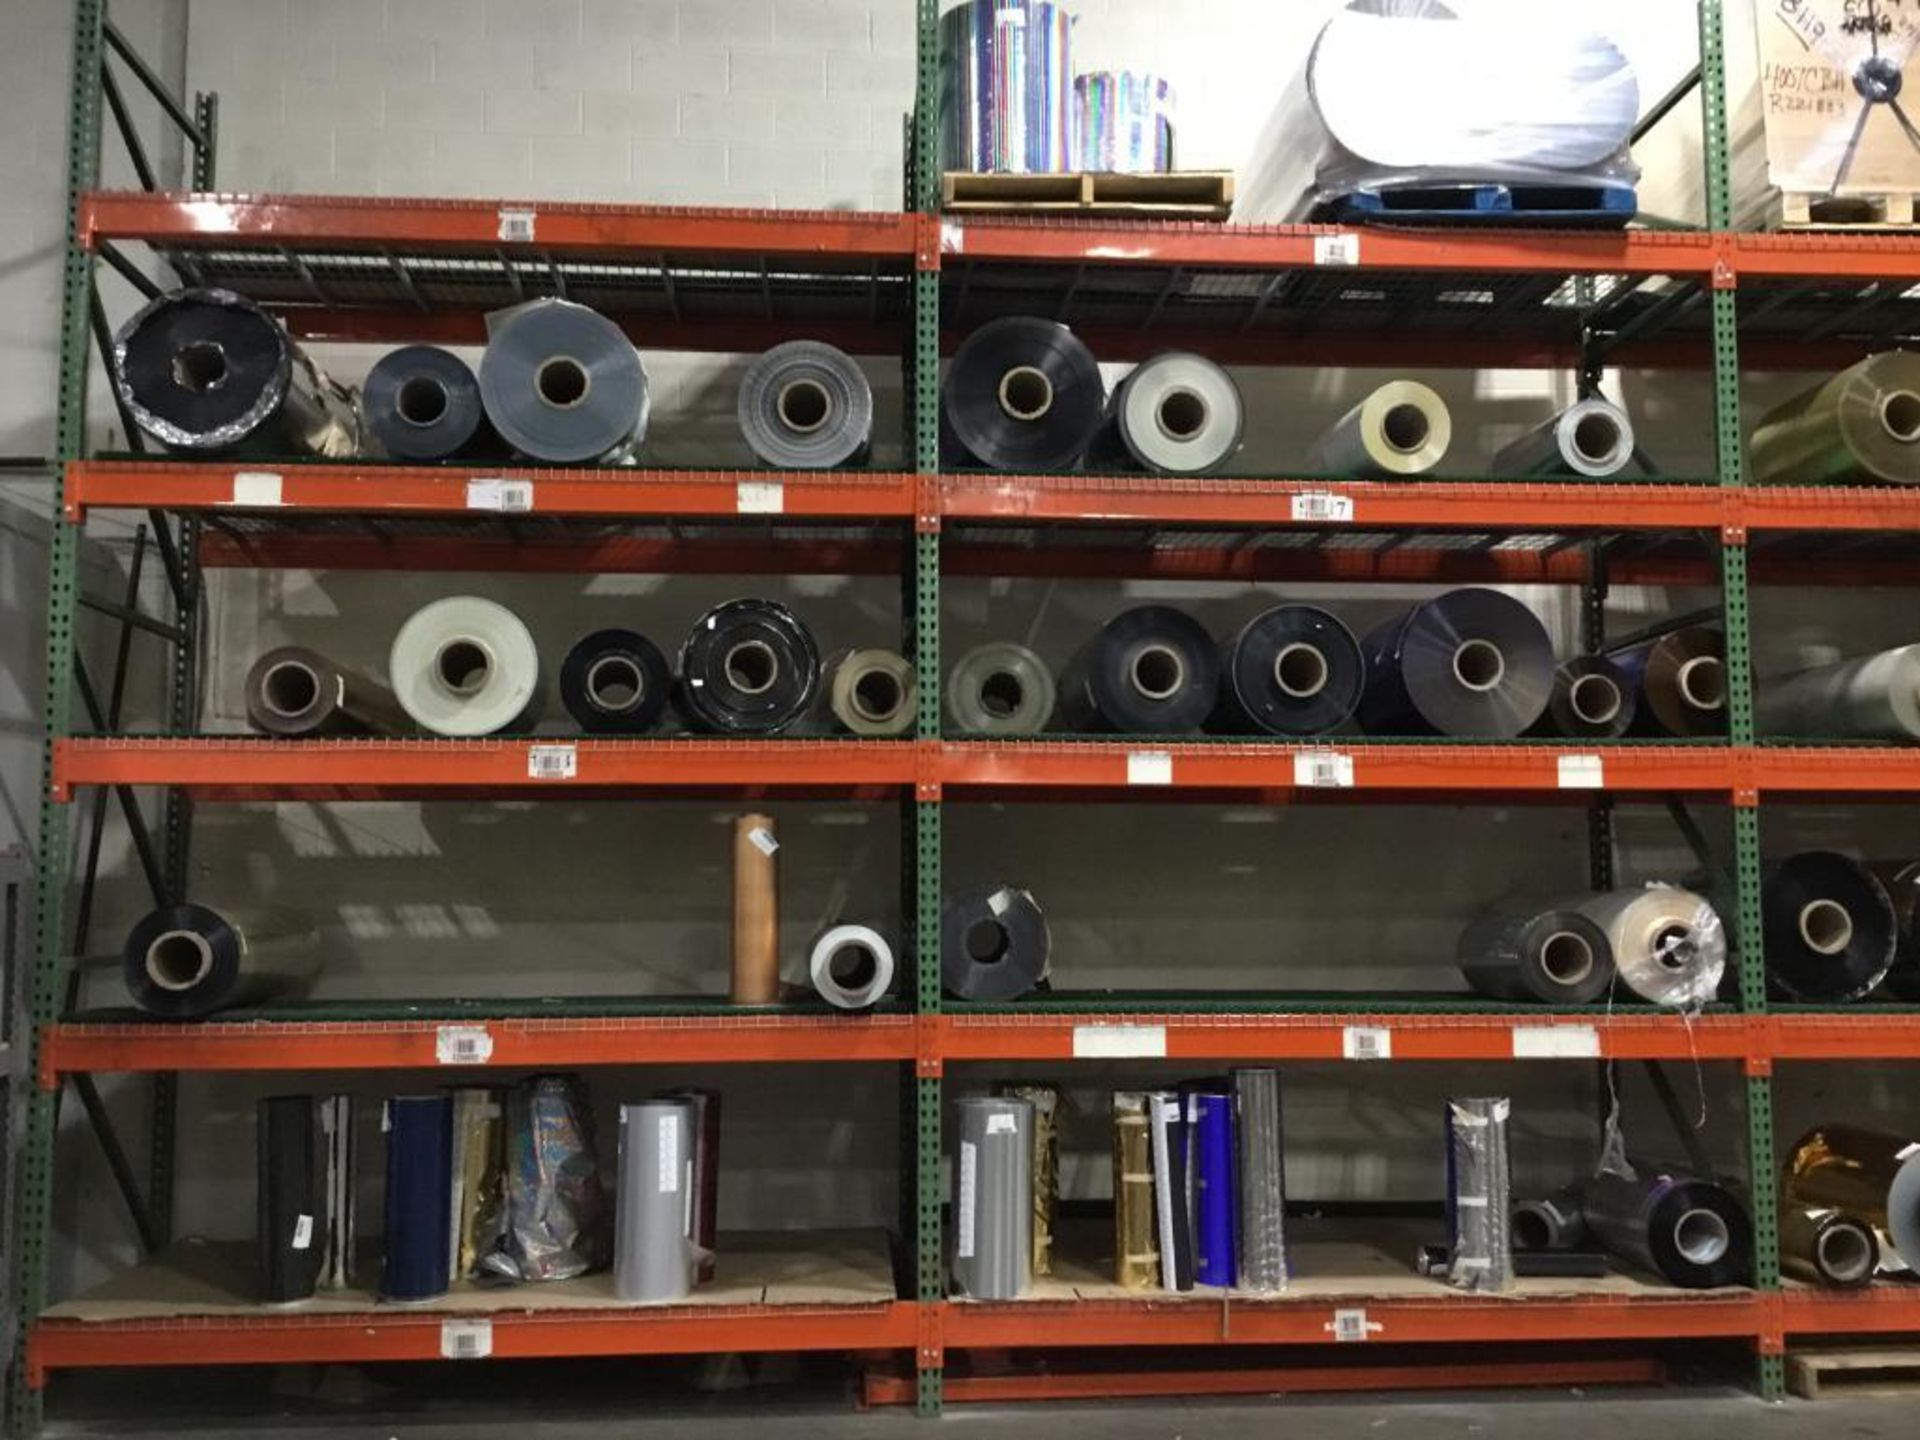 LOT: Entire Contents of Foil Roll Inventory in Building. On Shelving, Pallet Racking, Gaylords, etc. - Image 3 of 16